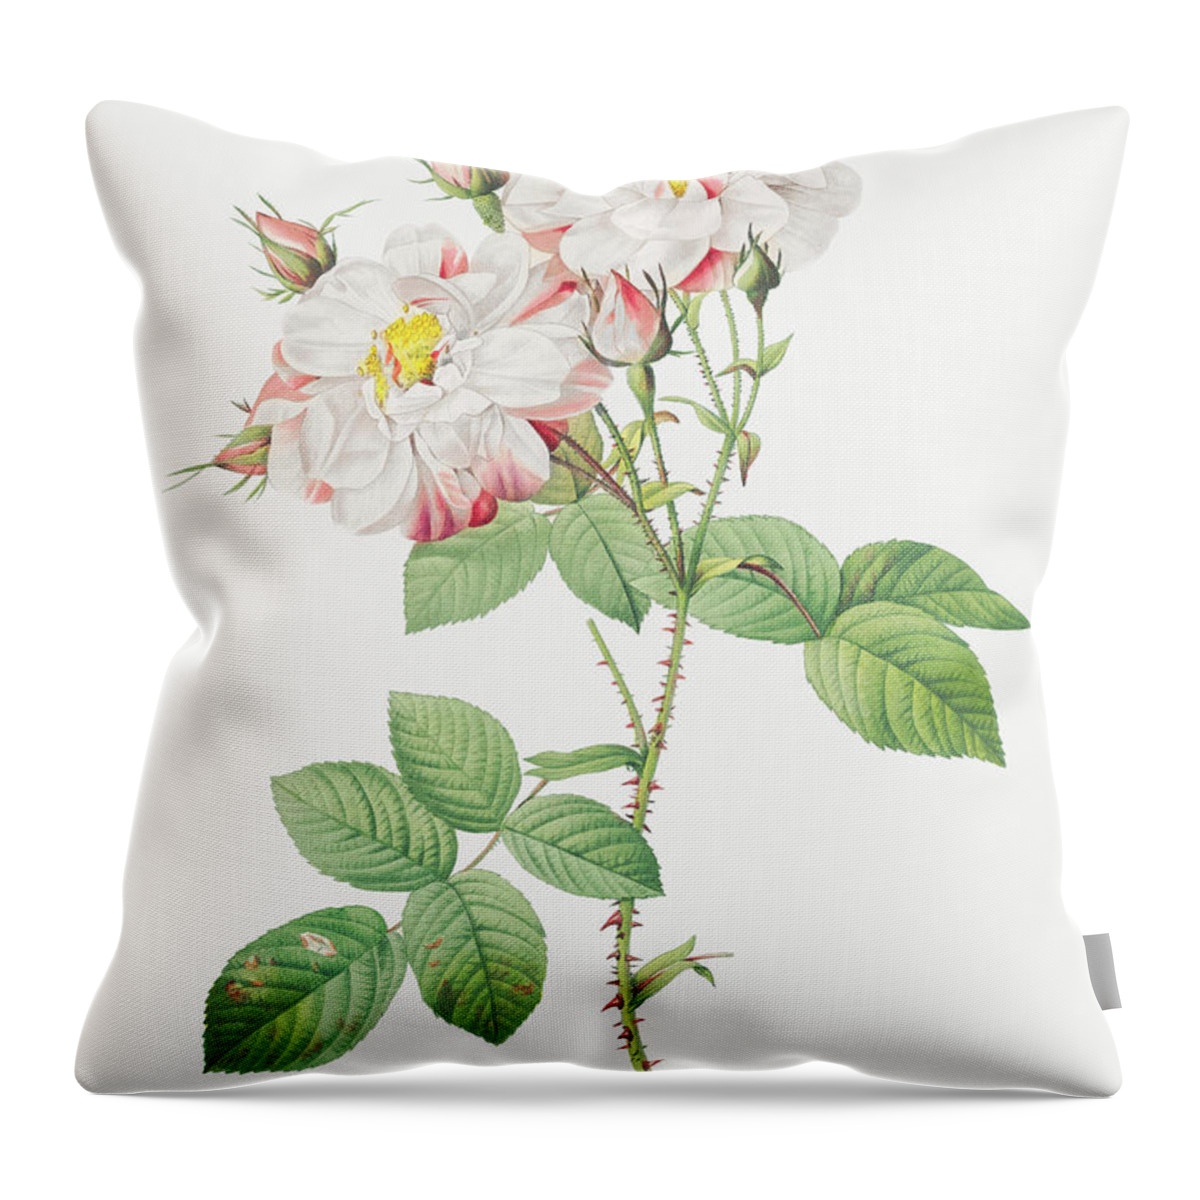 Rose Throw Pillow featuring the painting Damask Rose, York and Lancaster Rose also known as Rosa damascen by World Art Collective